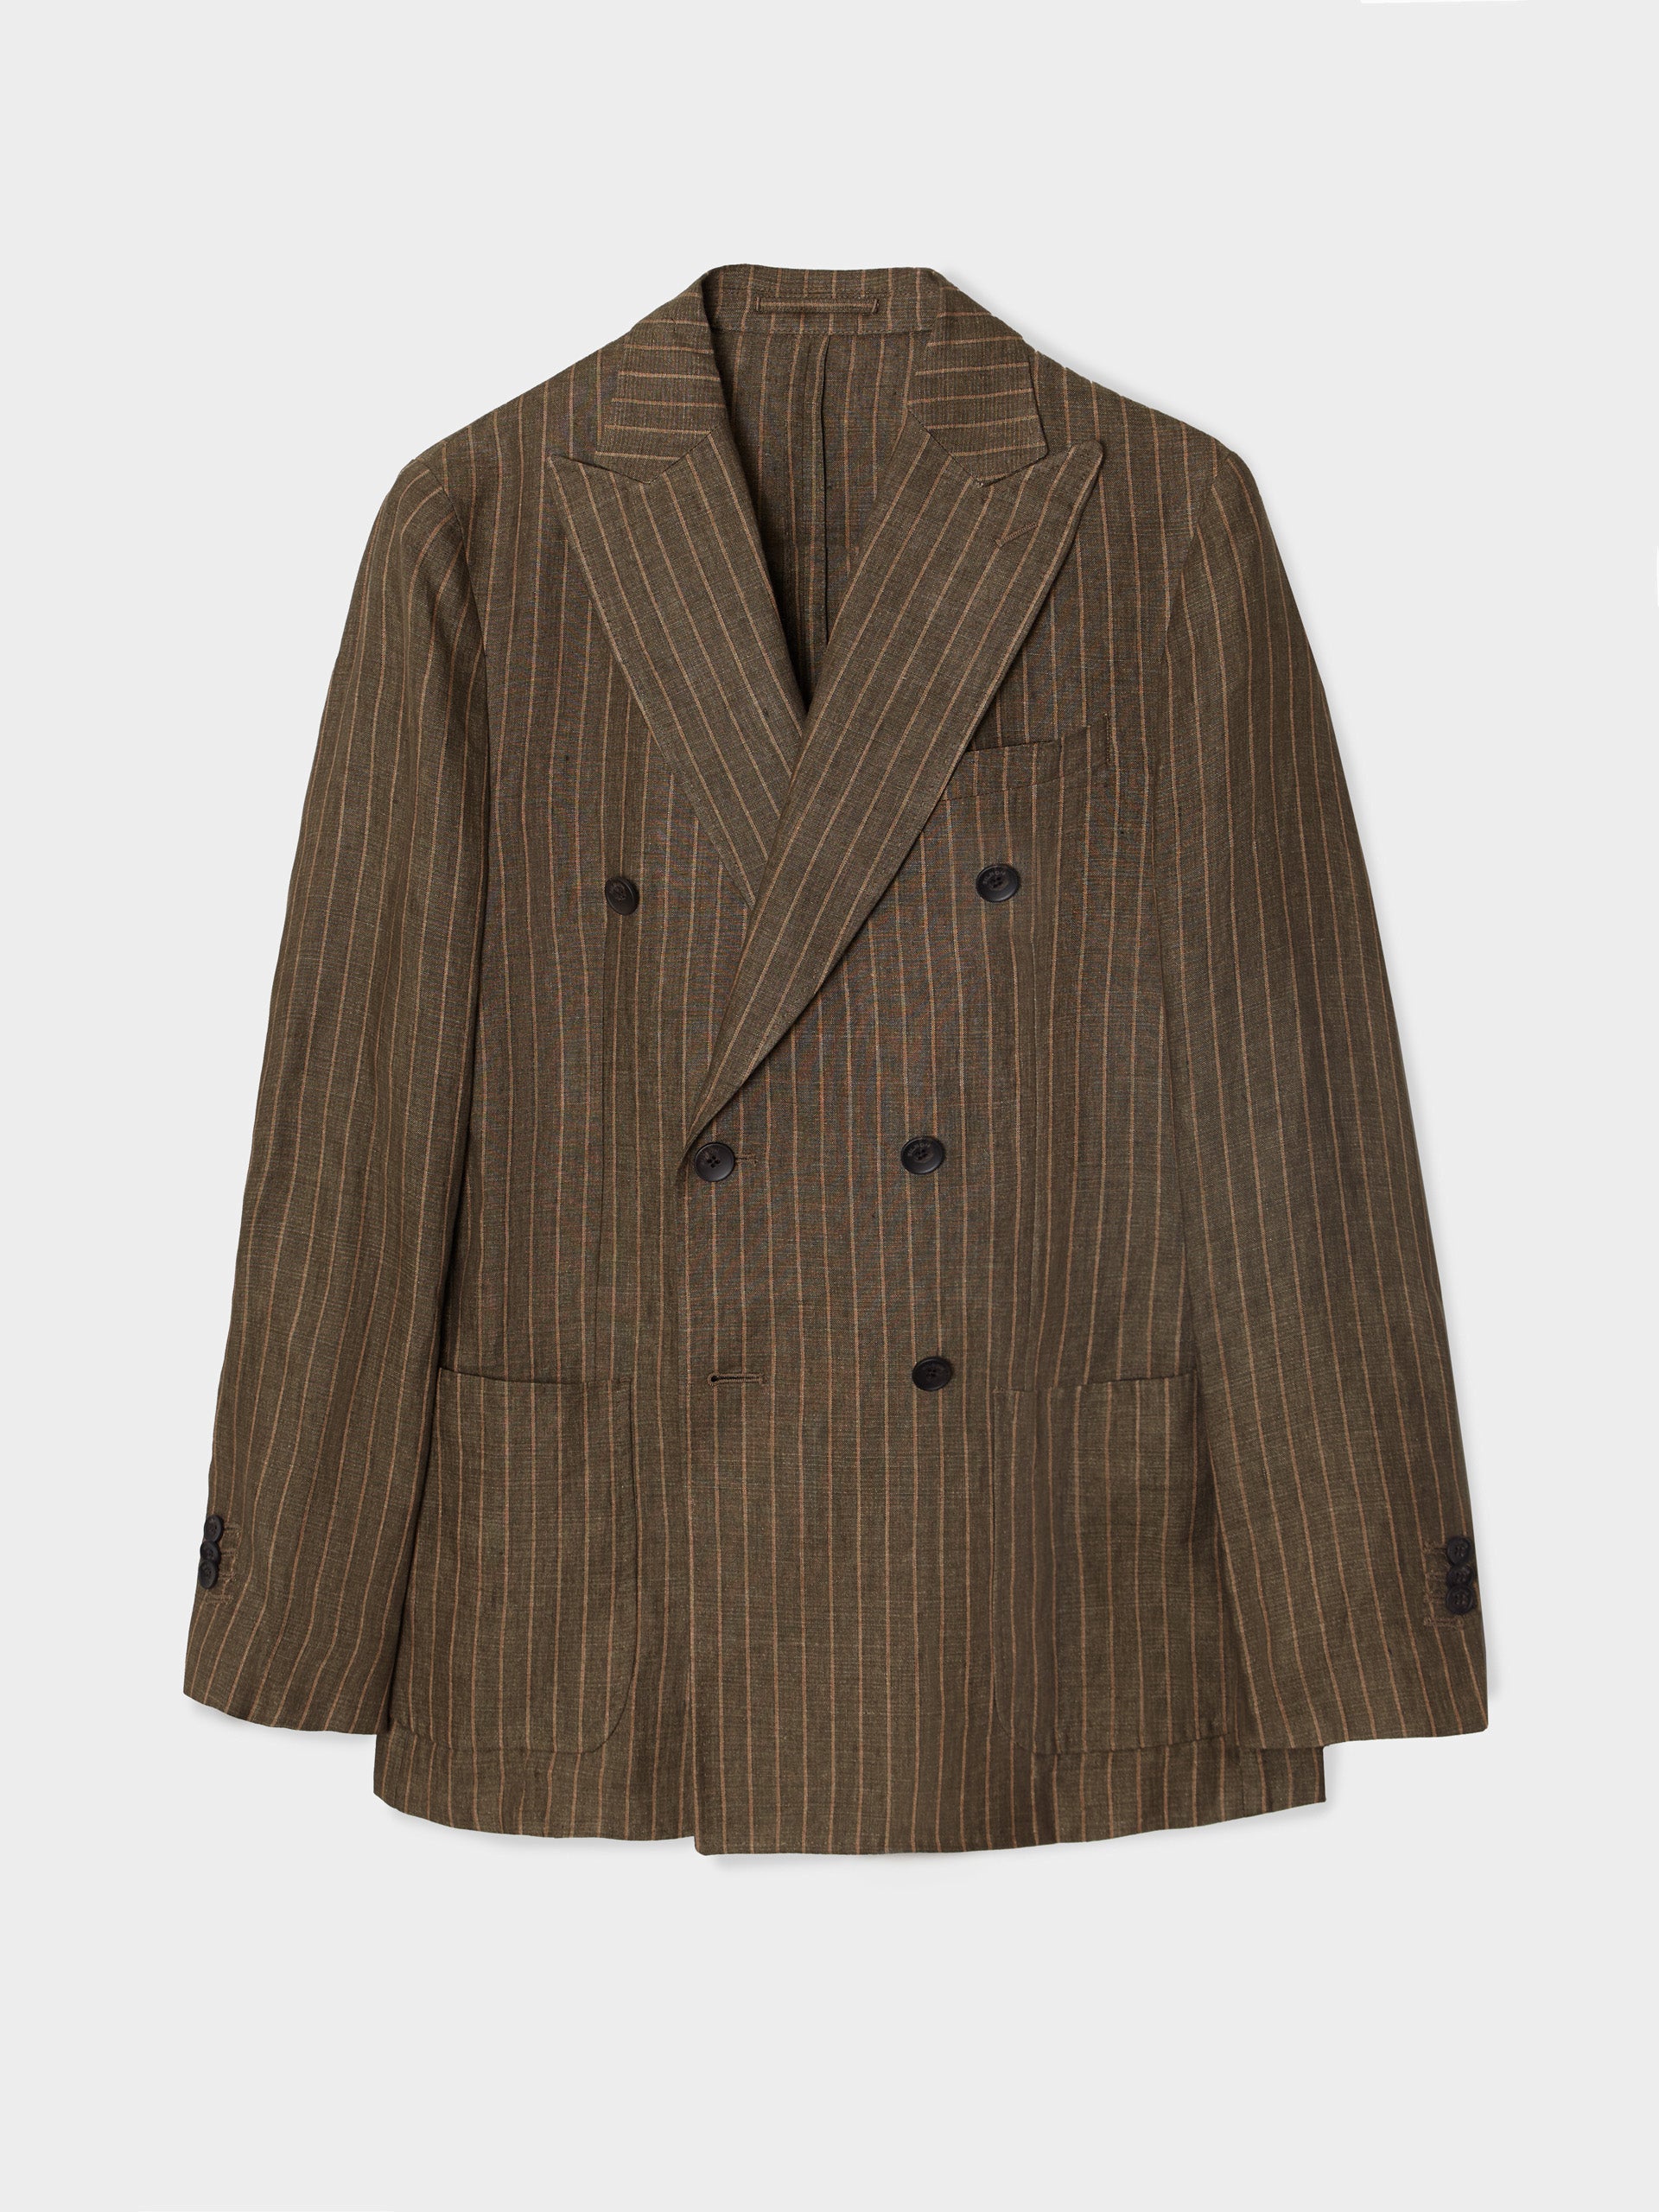 Double-breasted silbon blazer with brown pinstripe